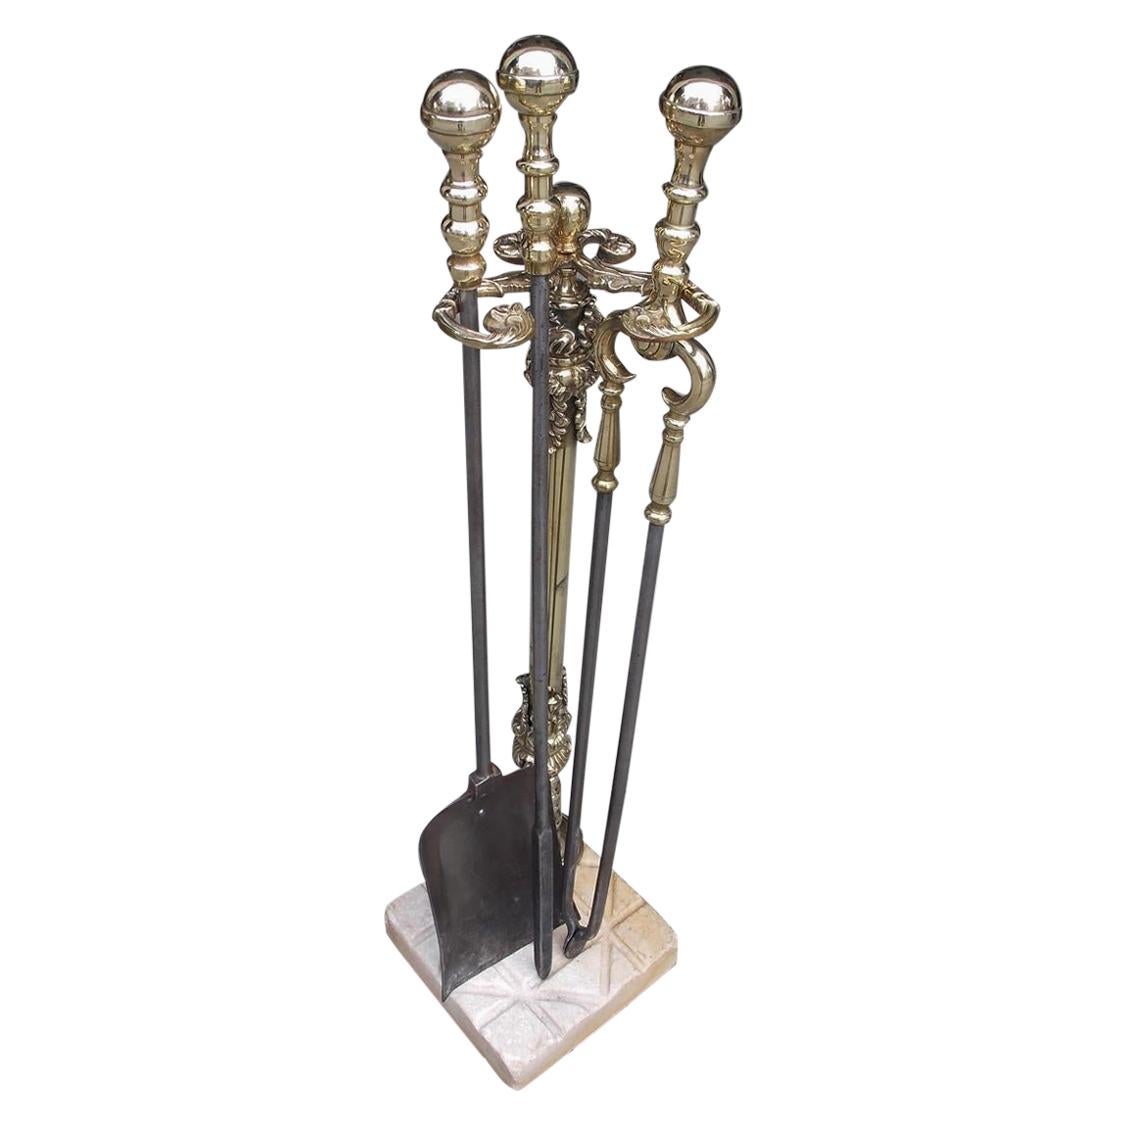 American Brass and Polished Steel Fireplace Tools on Marble Stand, Circa 1800